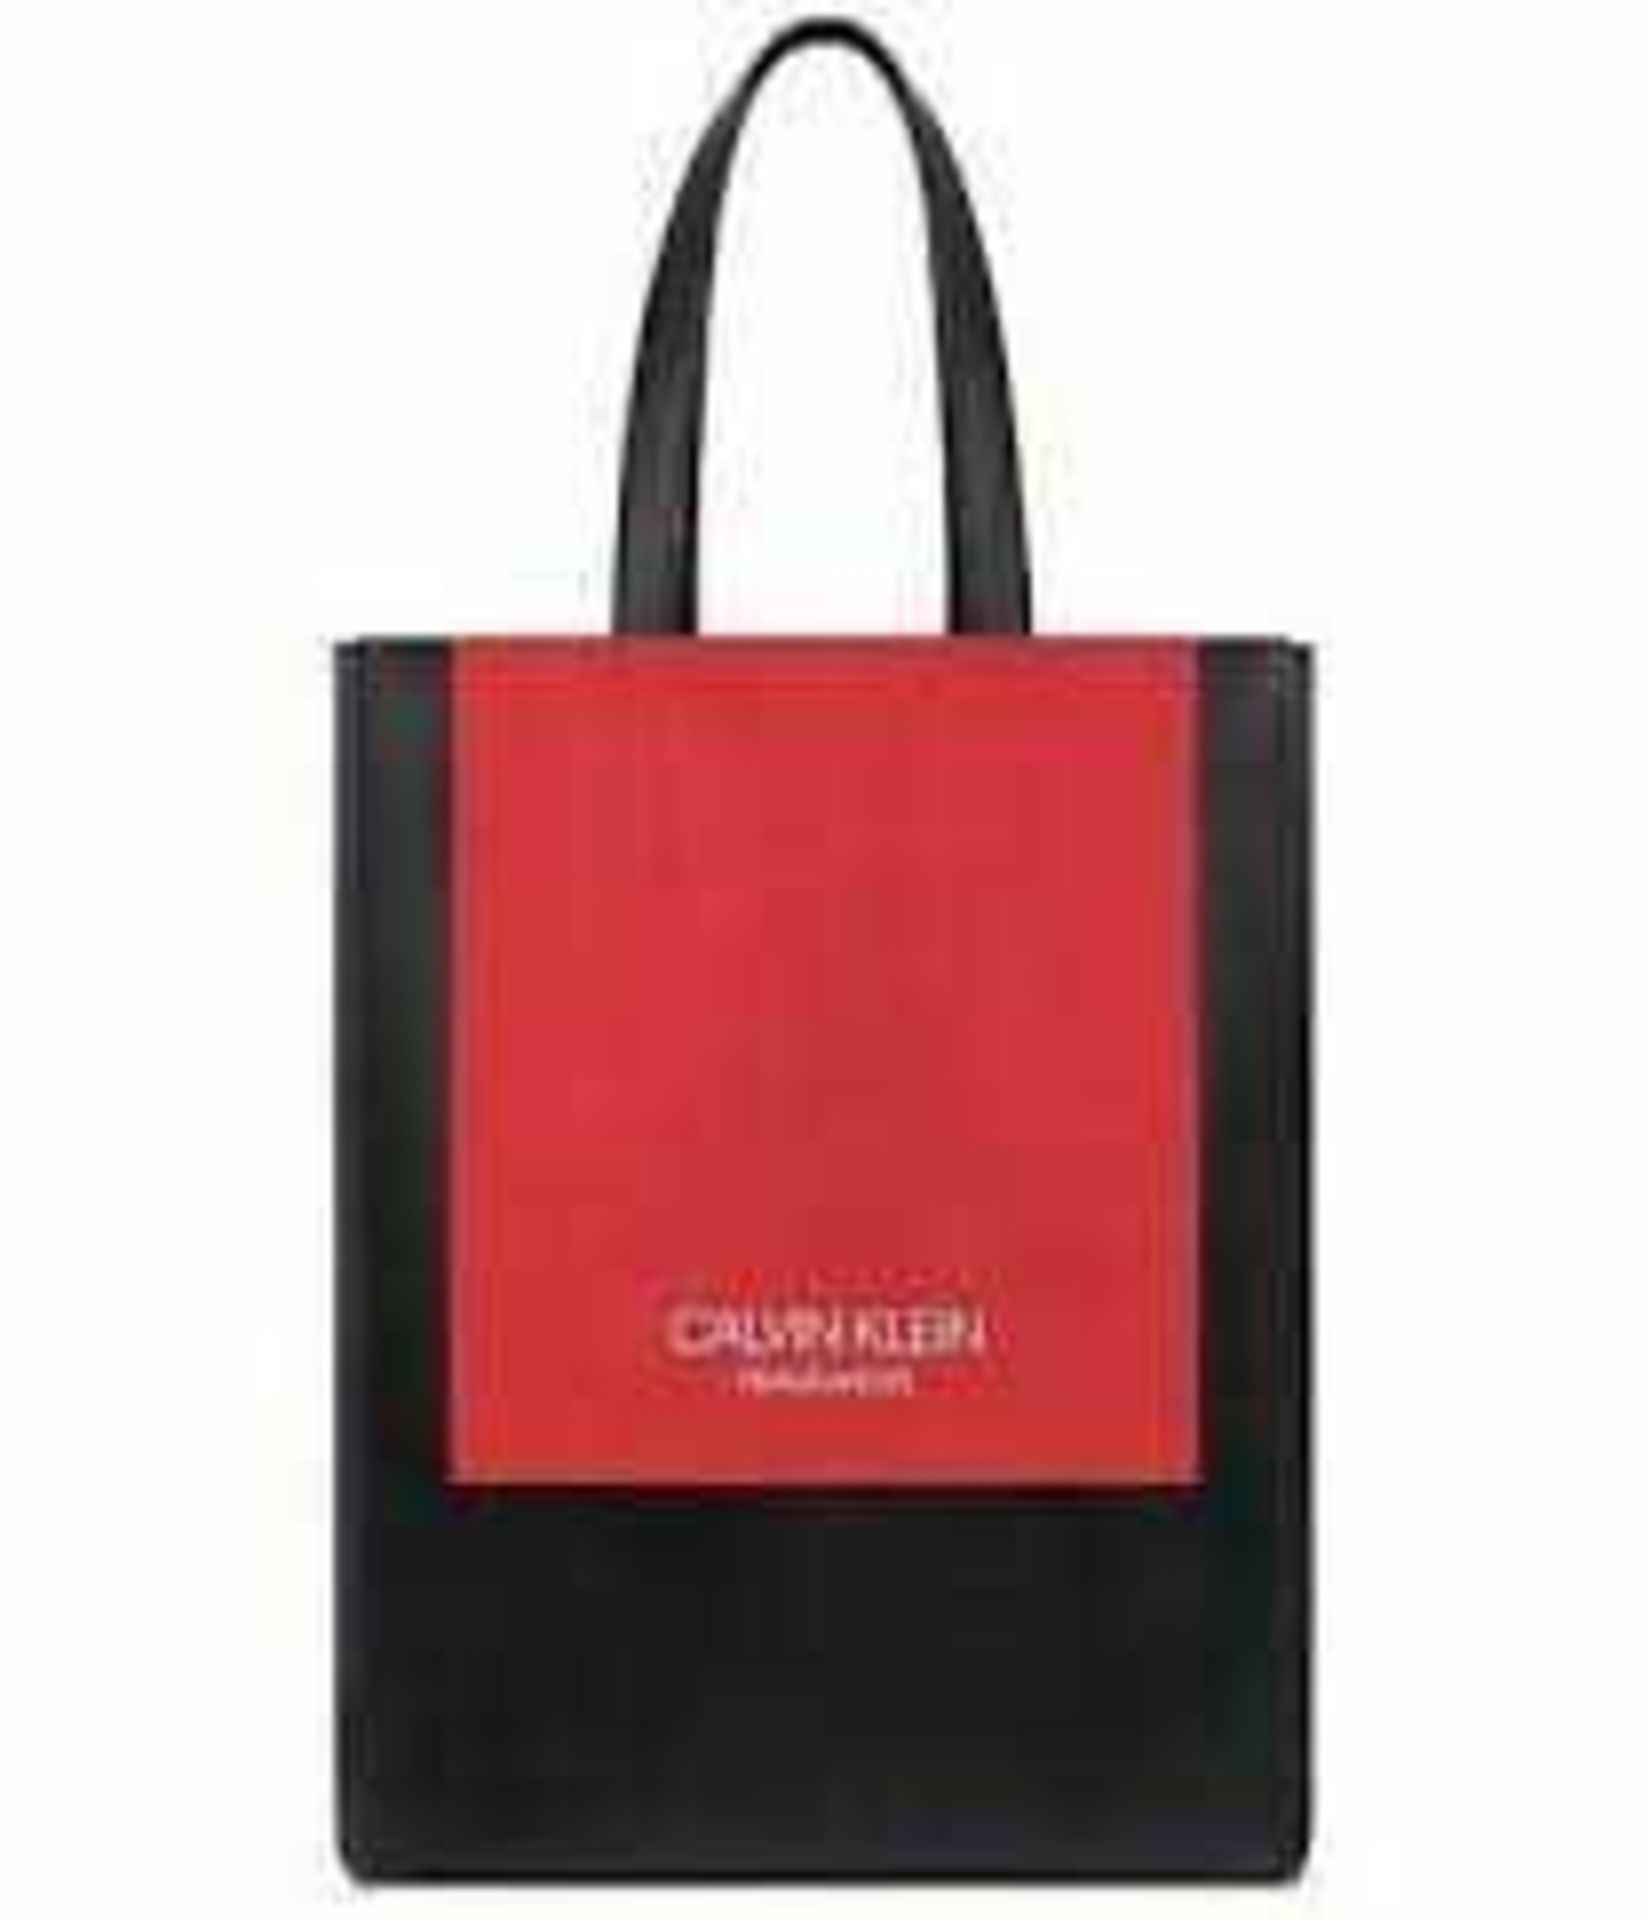 RRP £50 Each Brand New Bag And Sealed Calvin Klein Fragrances Ladies Shopping Tote Bags